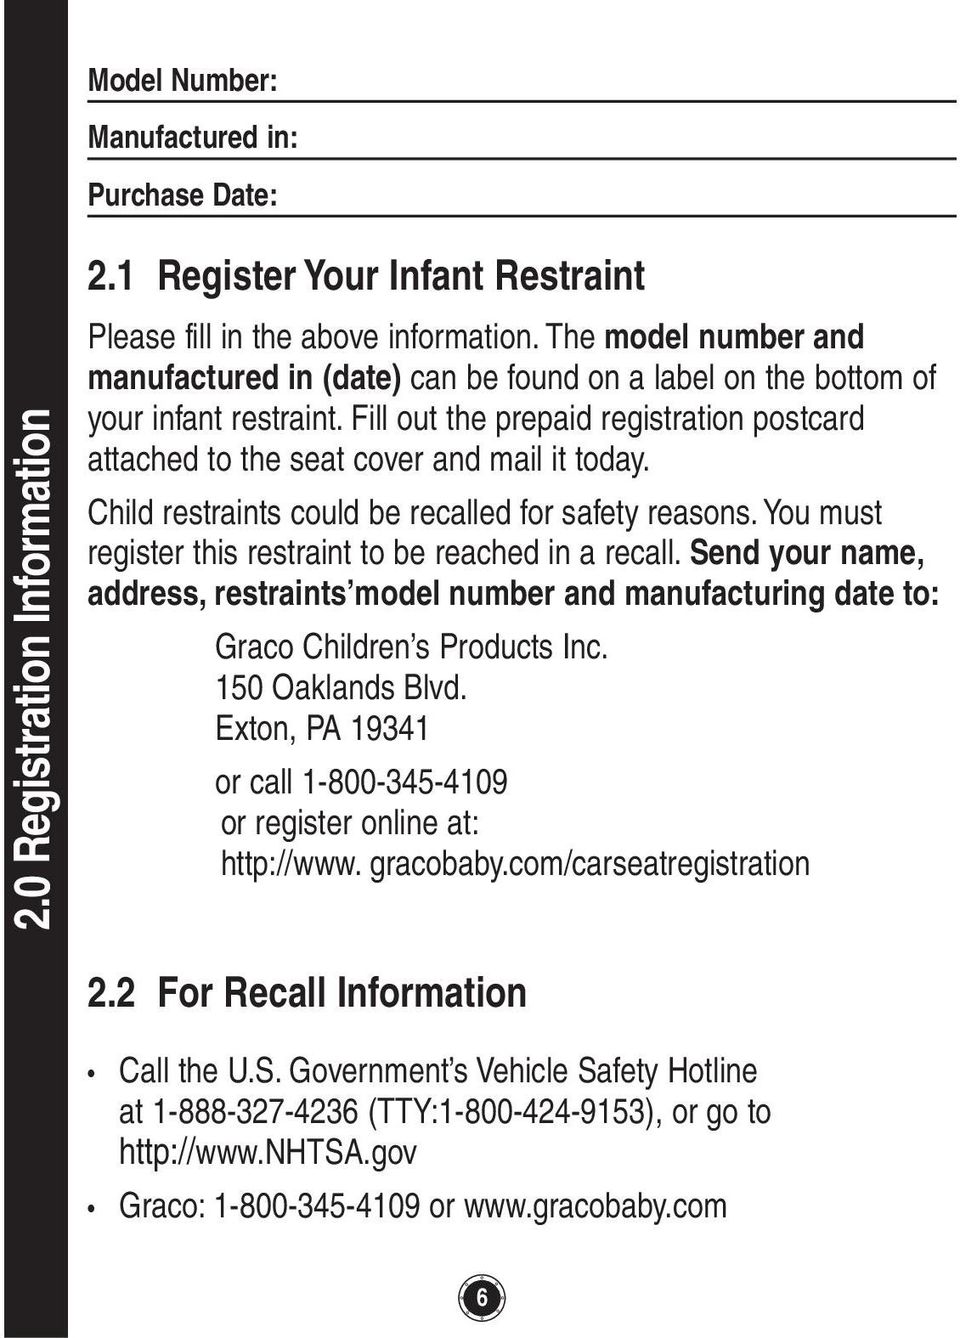 Child restraints could be recalled for safety reasons. You must register this restraint to be reached in a recall.